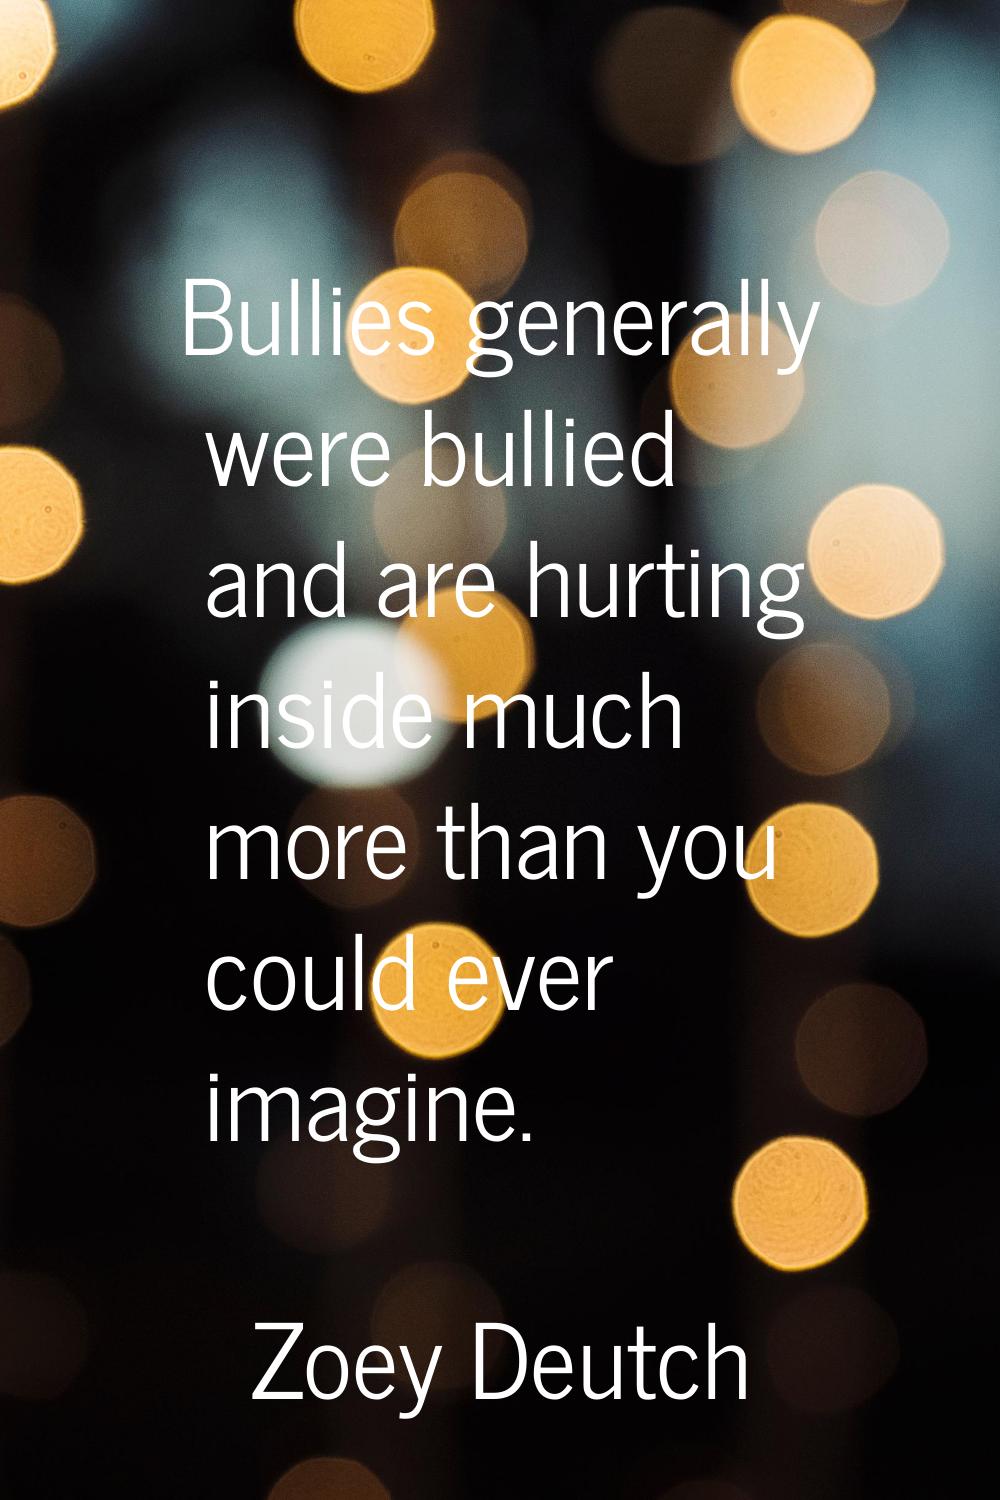 Bullies generally were bullied and are hurting inside much more than you could ever imagine.